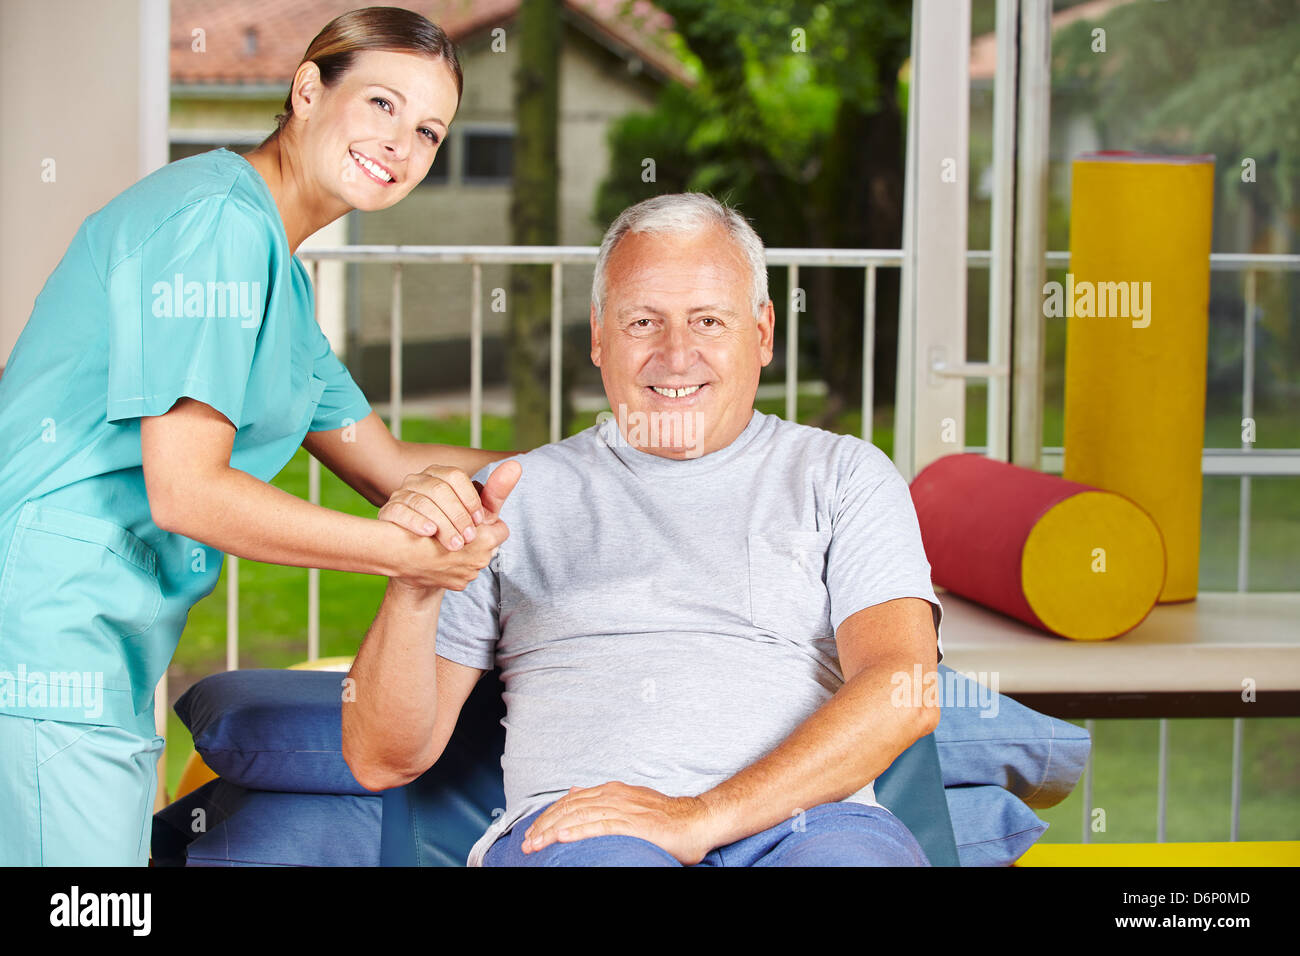 Senior man getting physiotherapy with a physiotherapist Stock Photo